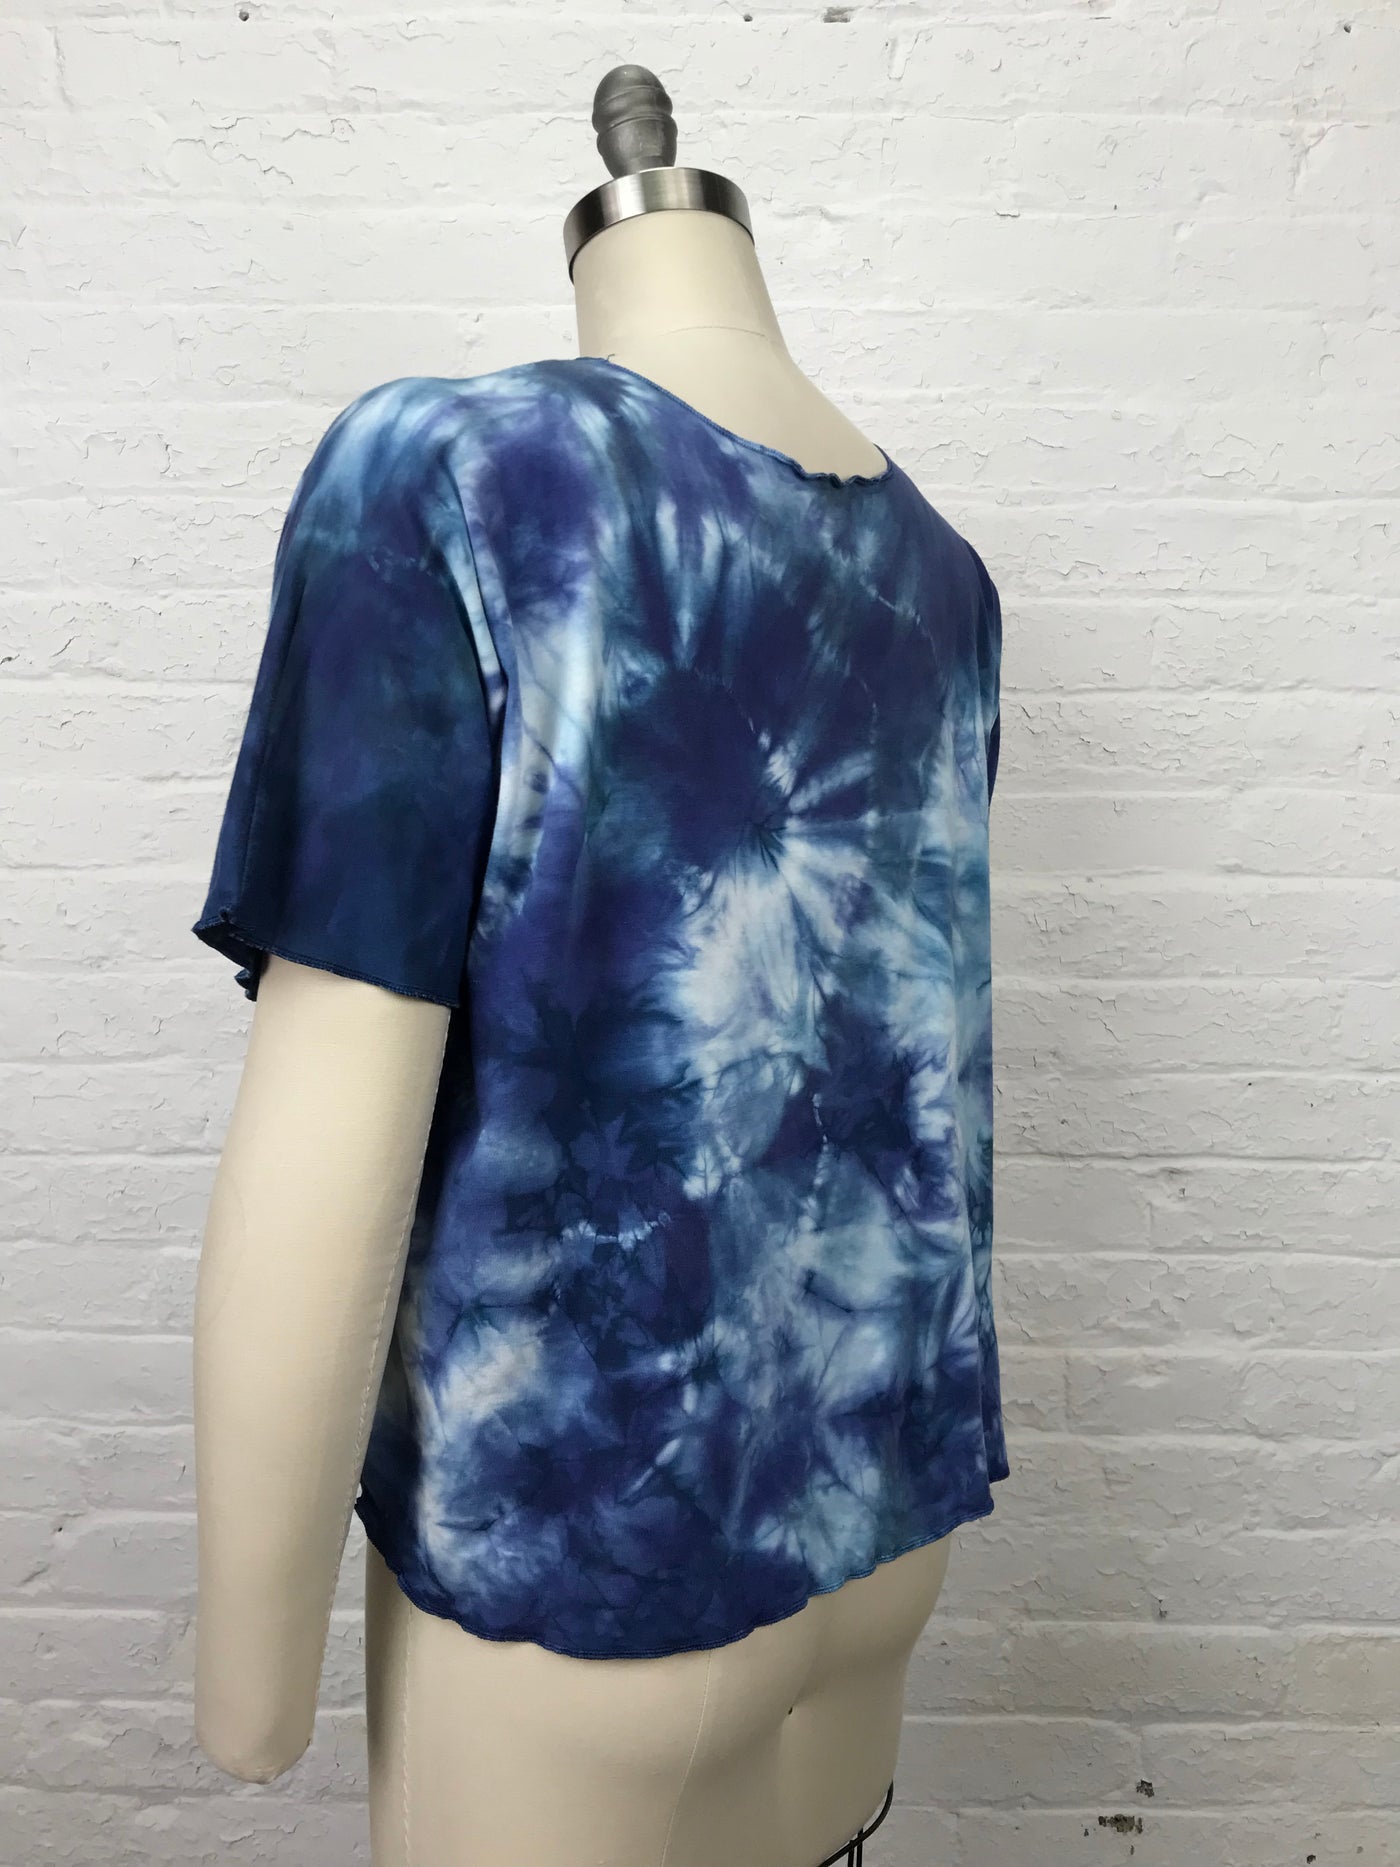 Juni Short Sleeve Top in Summer Storm Clouds - One size